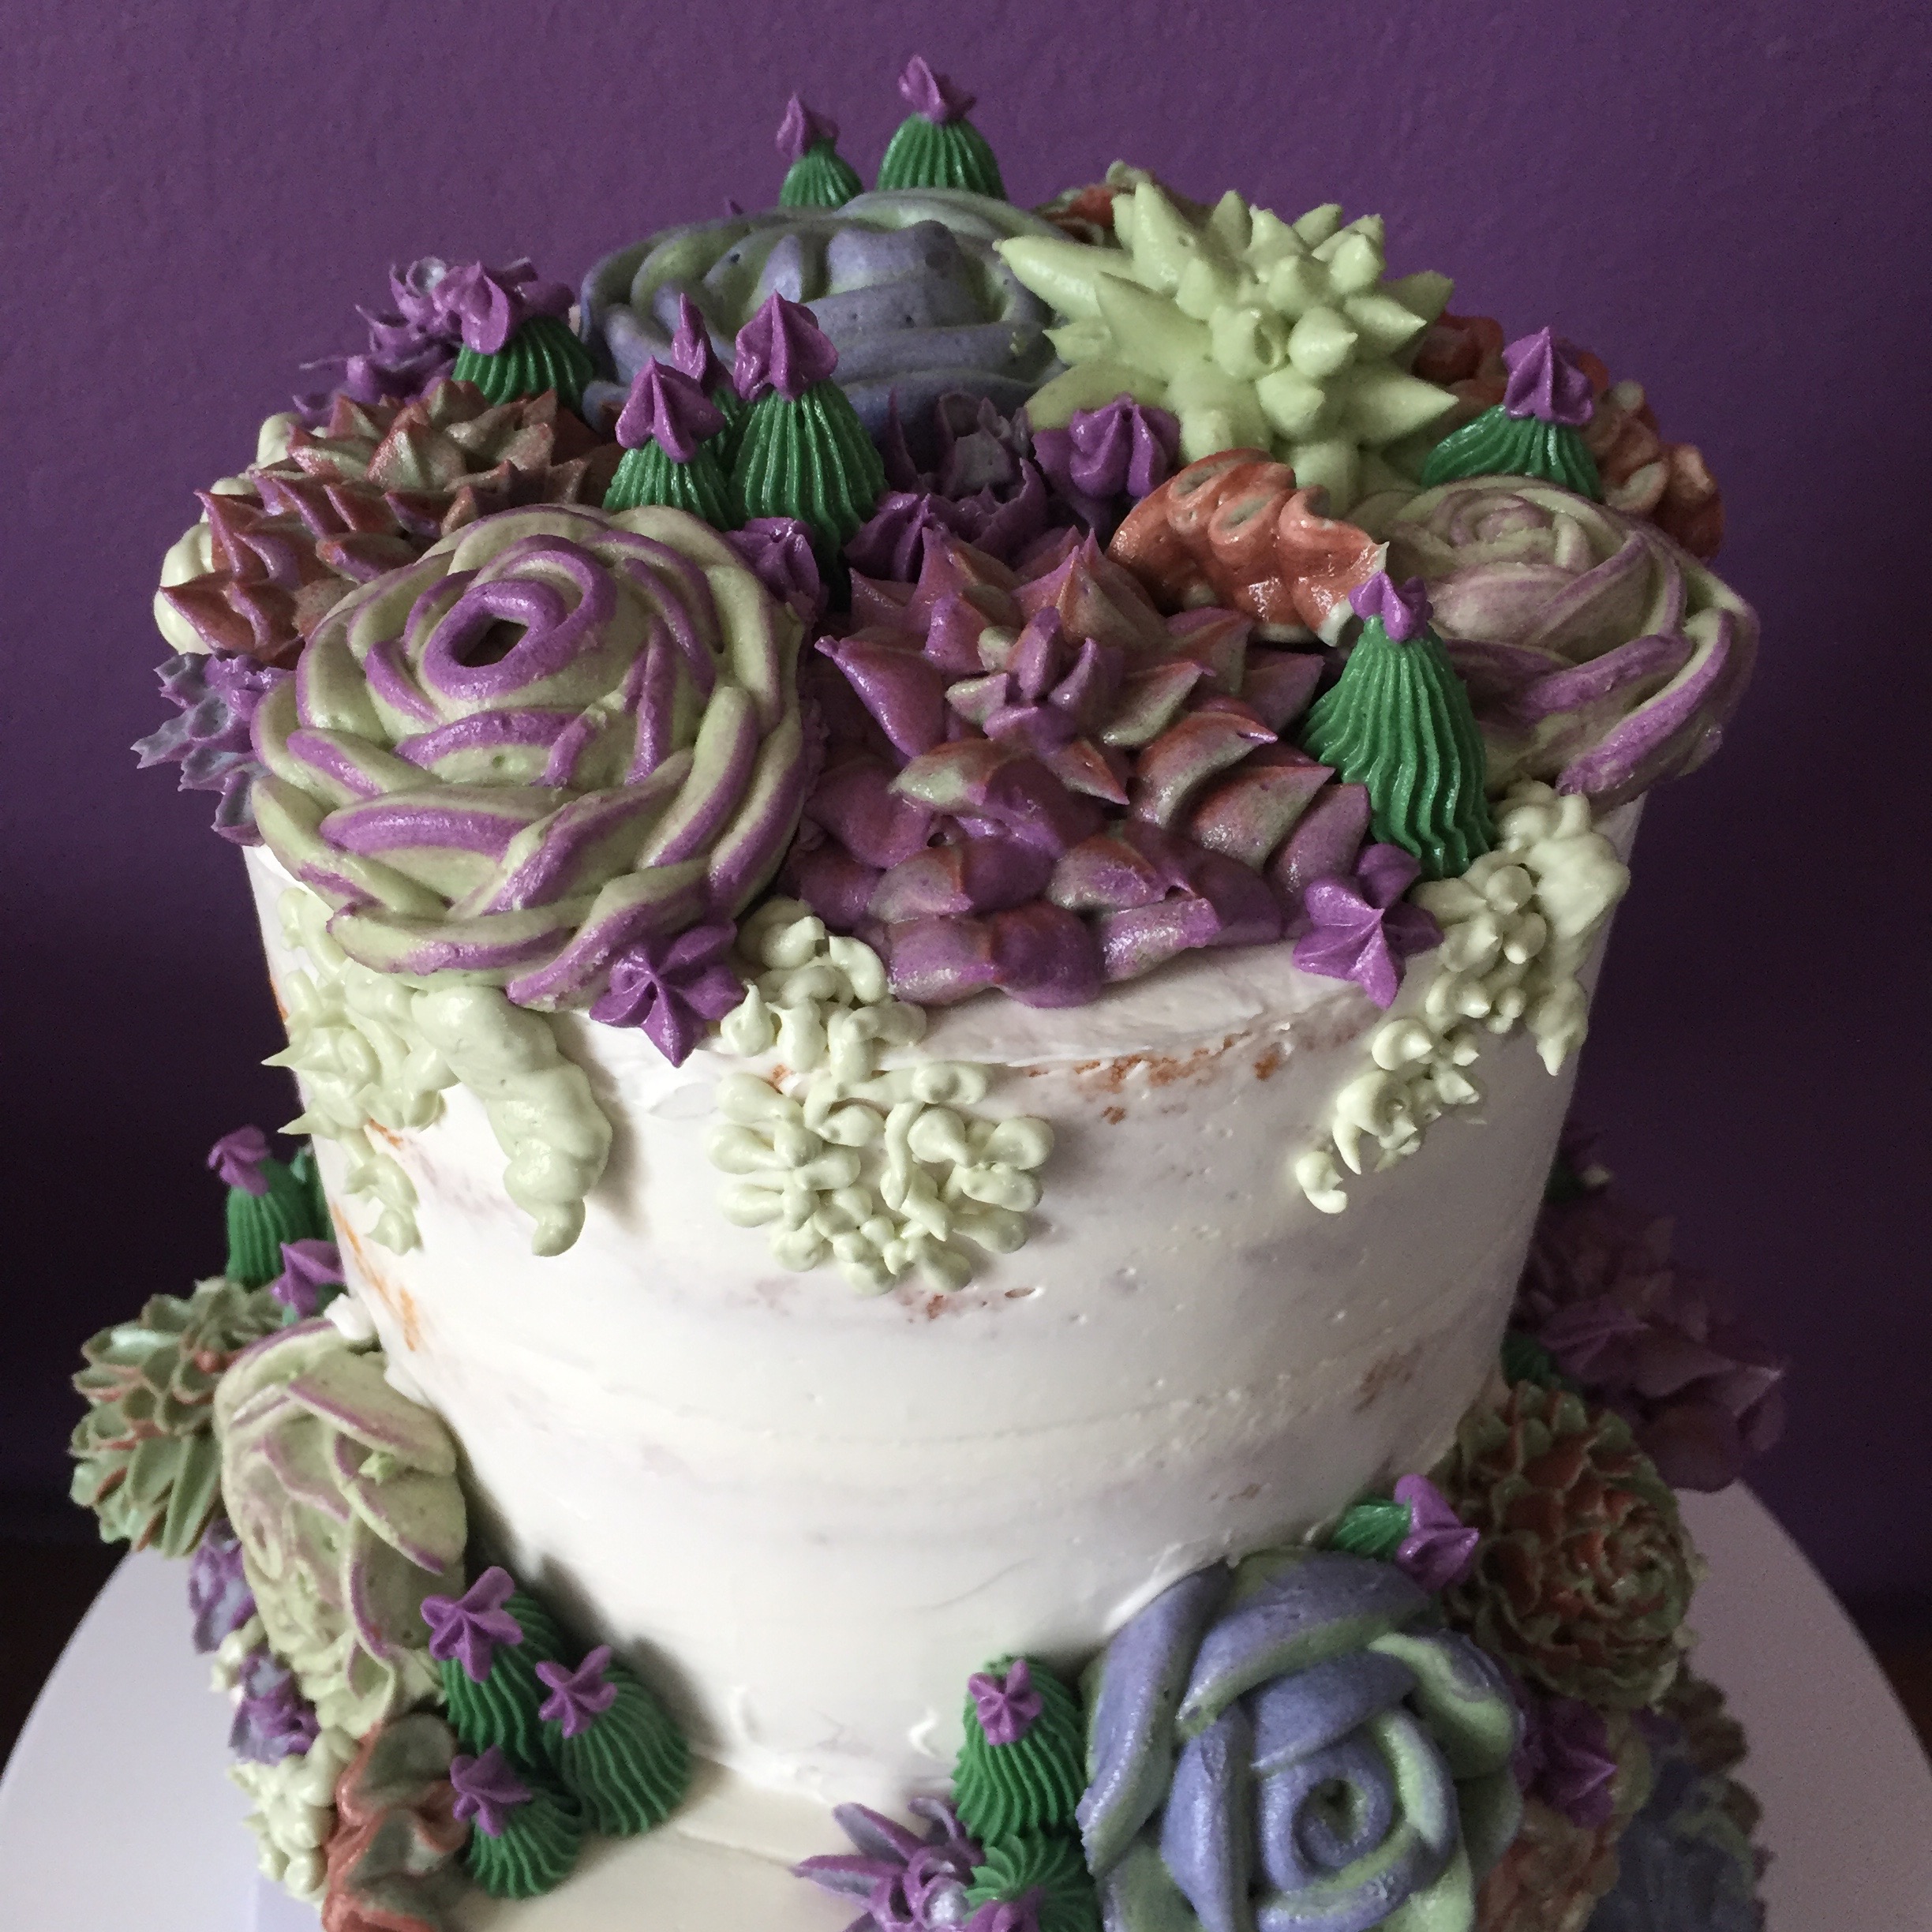 Two Tiered Succulent Cake - Amuse Bake Shop